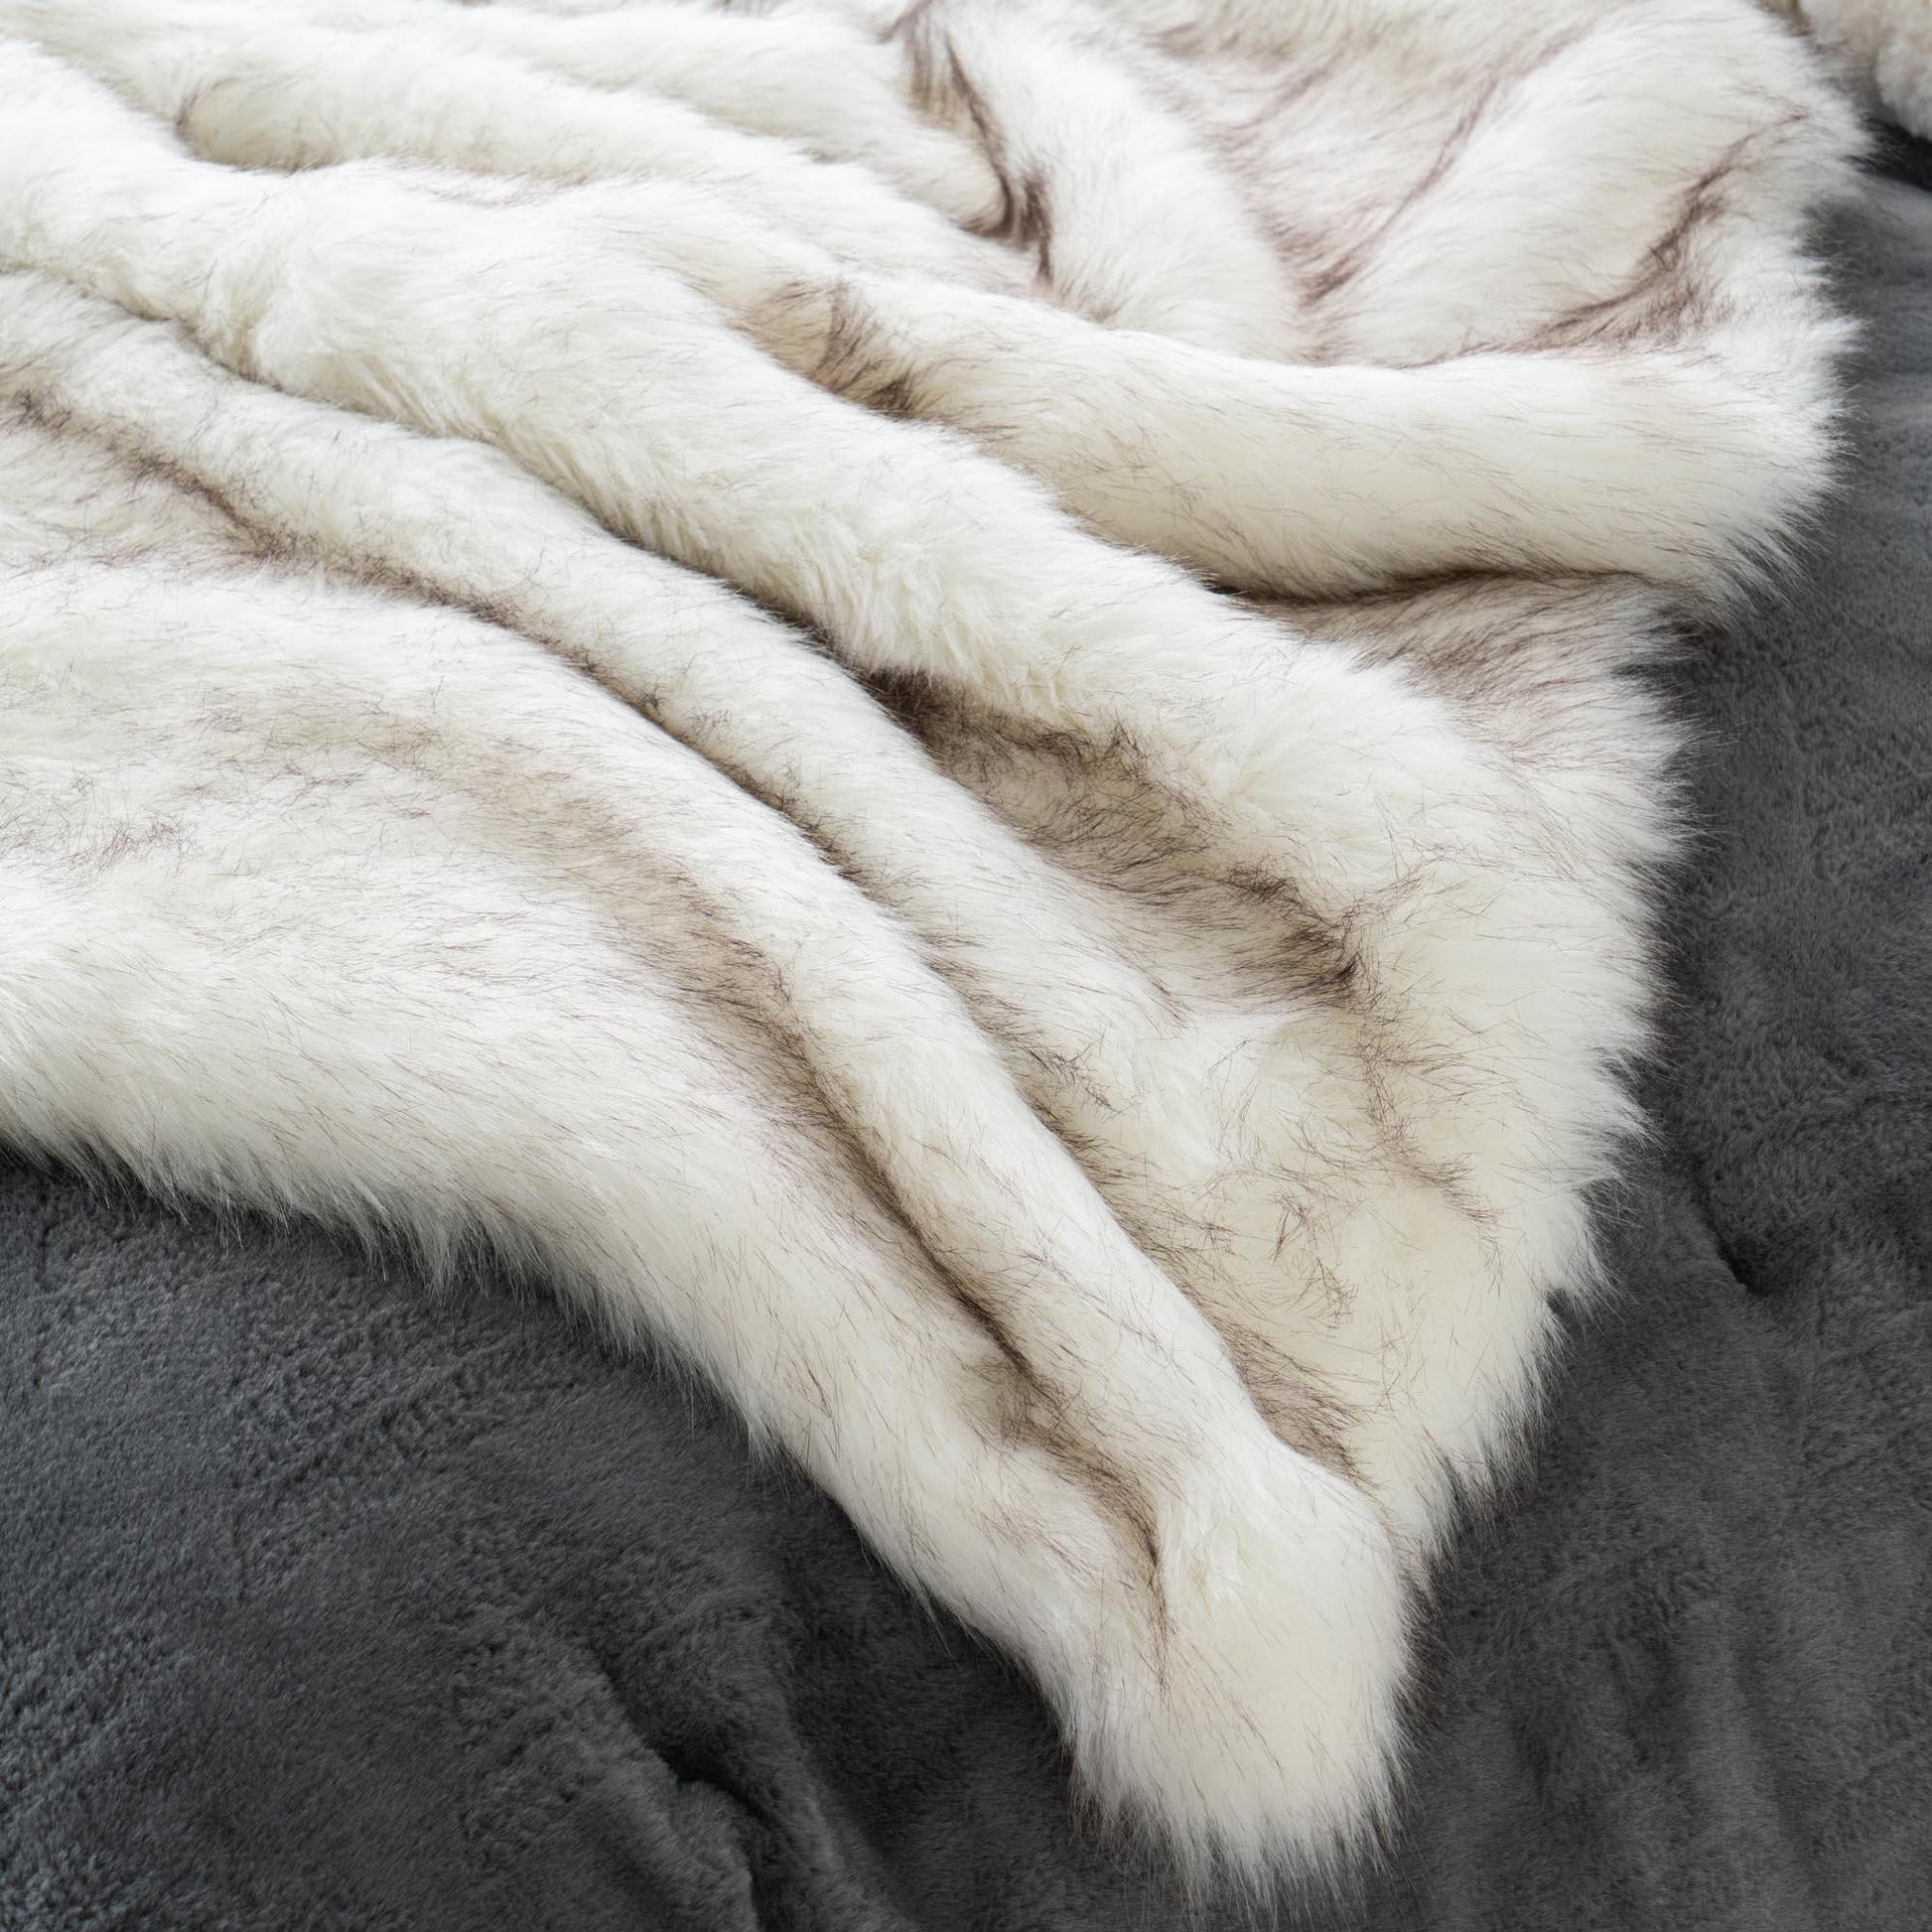 BATTILO HOME Luxury White Faux Fur Blanket Extra Large 60 x 80 Inches Super  Soft Oversized Fox Fur Throw Blankets for Couch, Bed Reversible to Plush